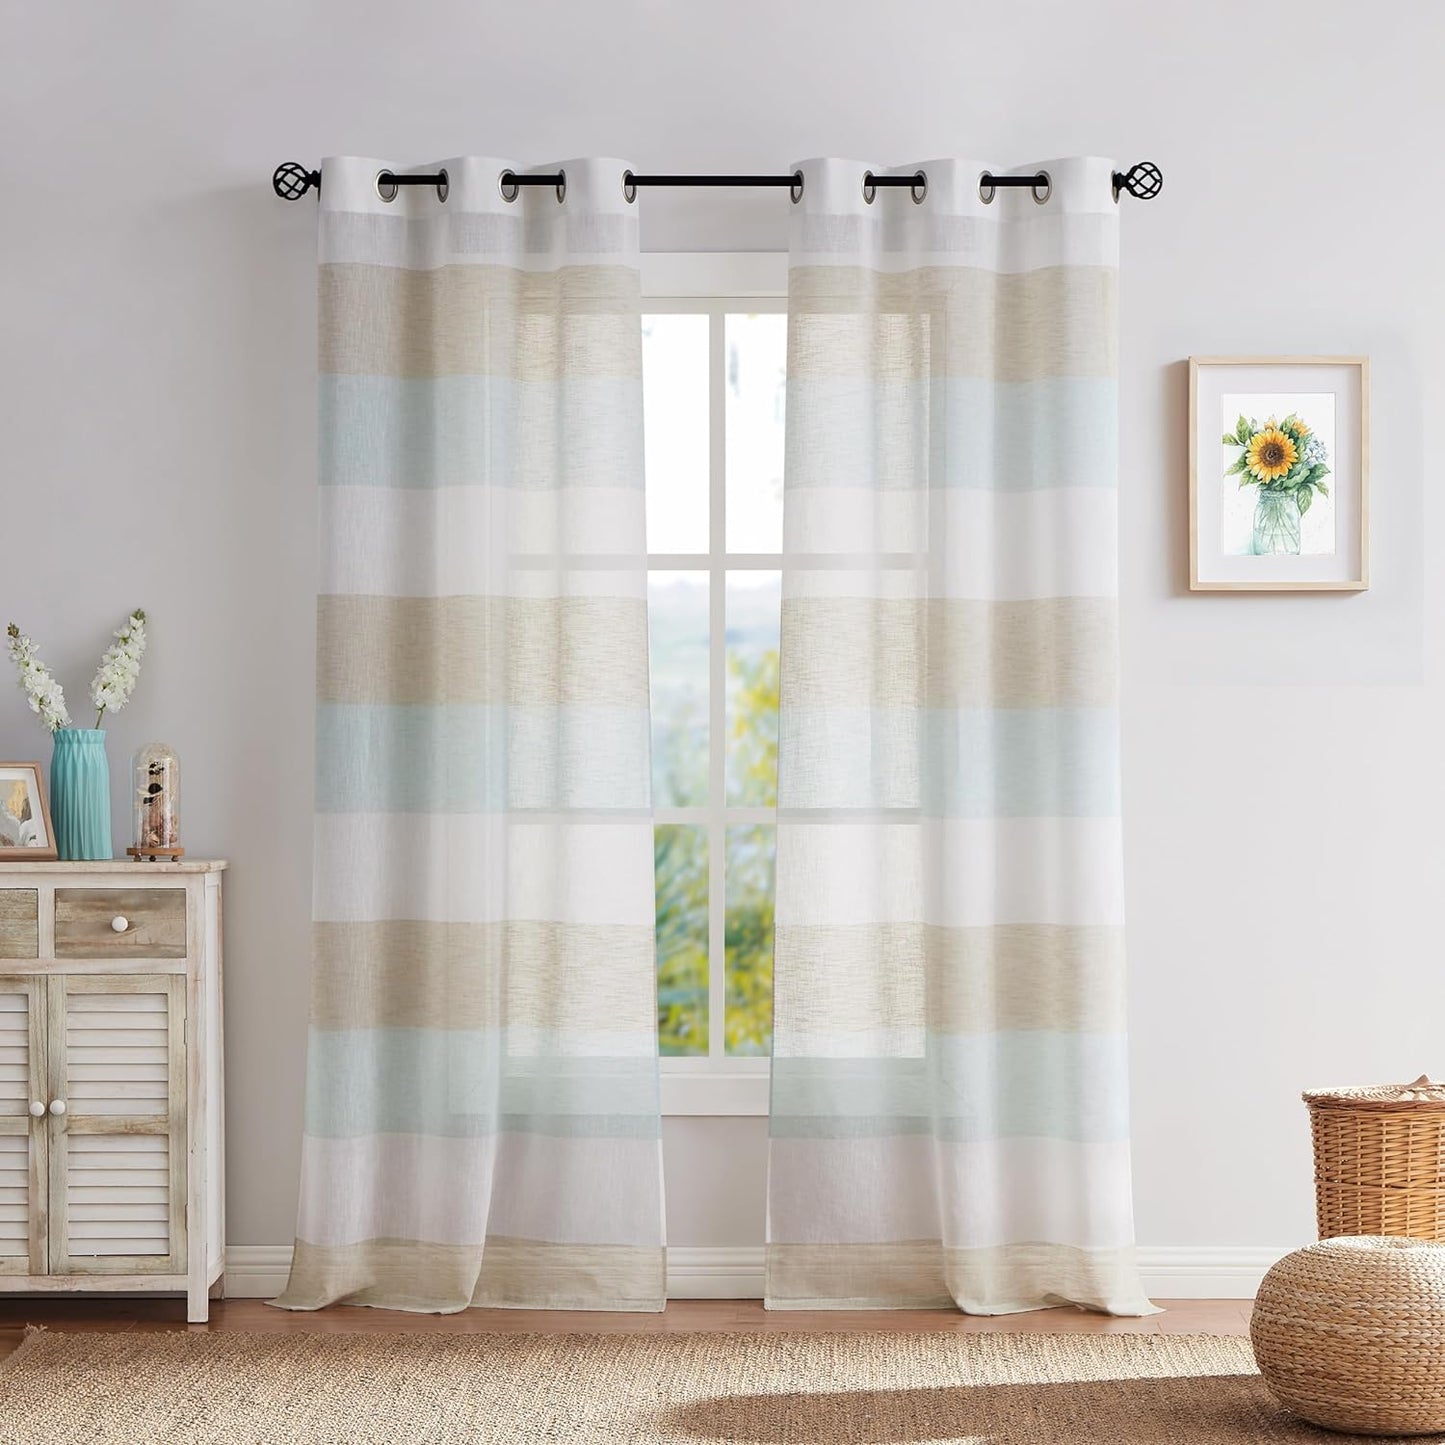 Central Park Gray Tan Stripe Sheer Color Block Window Curtain Panel Linen Window Treatment for Bedroom Living Room Farmhouse 84 Inches Long with Grommets, 2 Panel Rustic Drapes  Central Park Tan/Spa Blue 40"X84"X2 